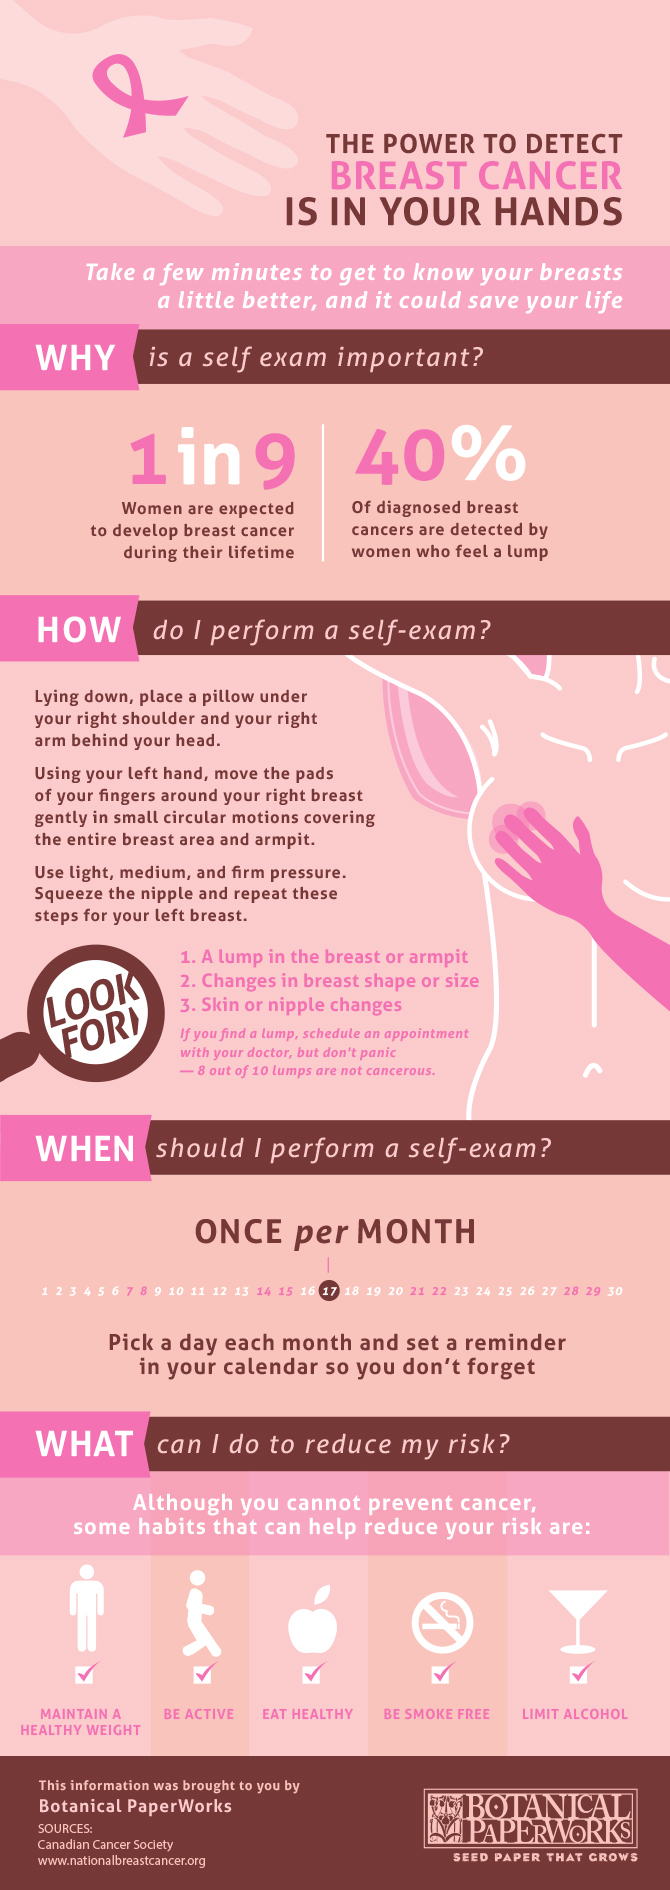 13. Self analysis of breast cancer